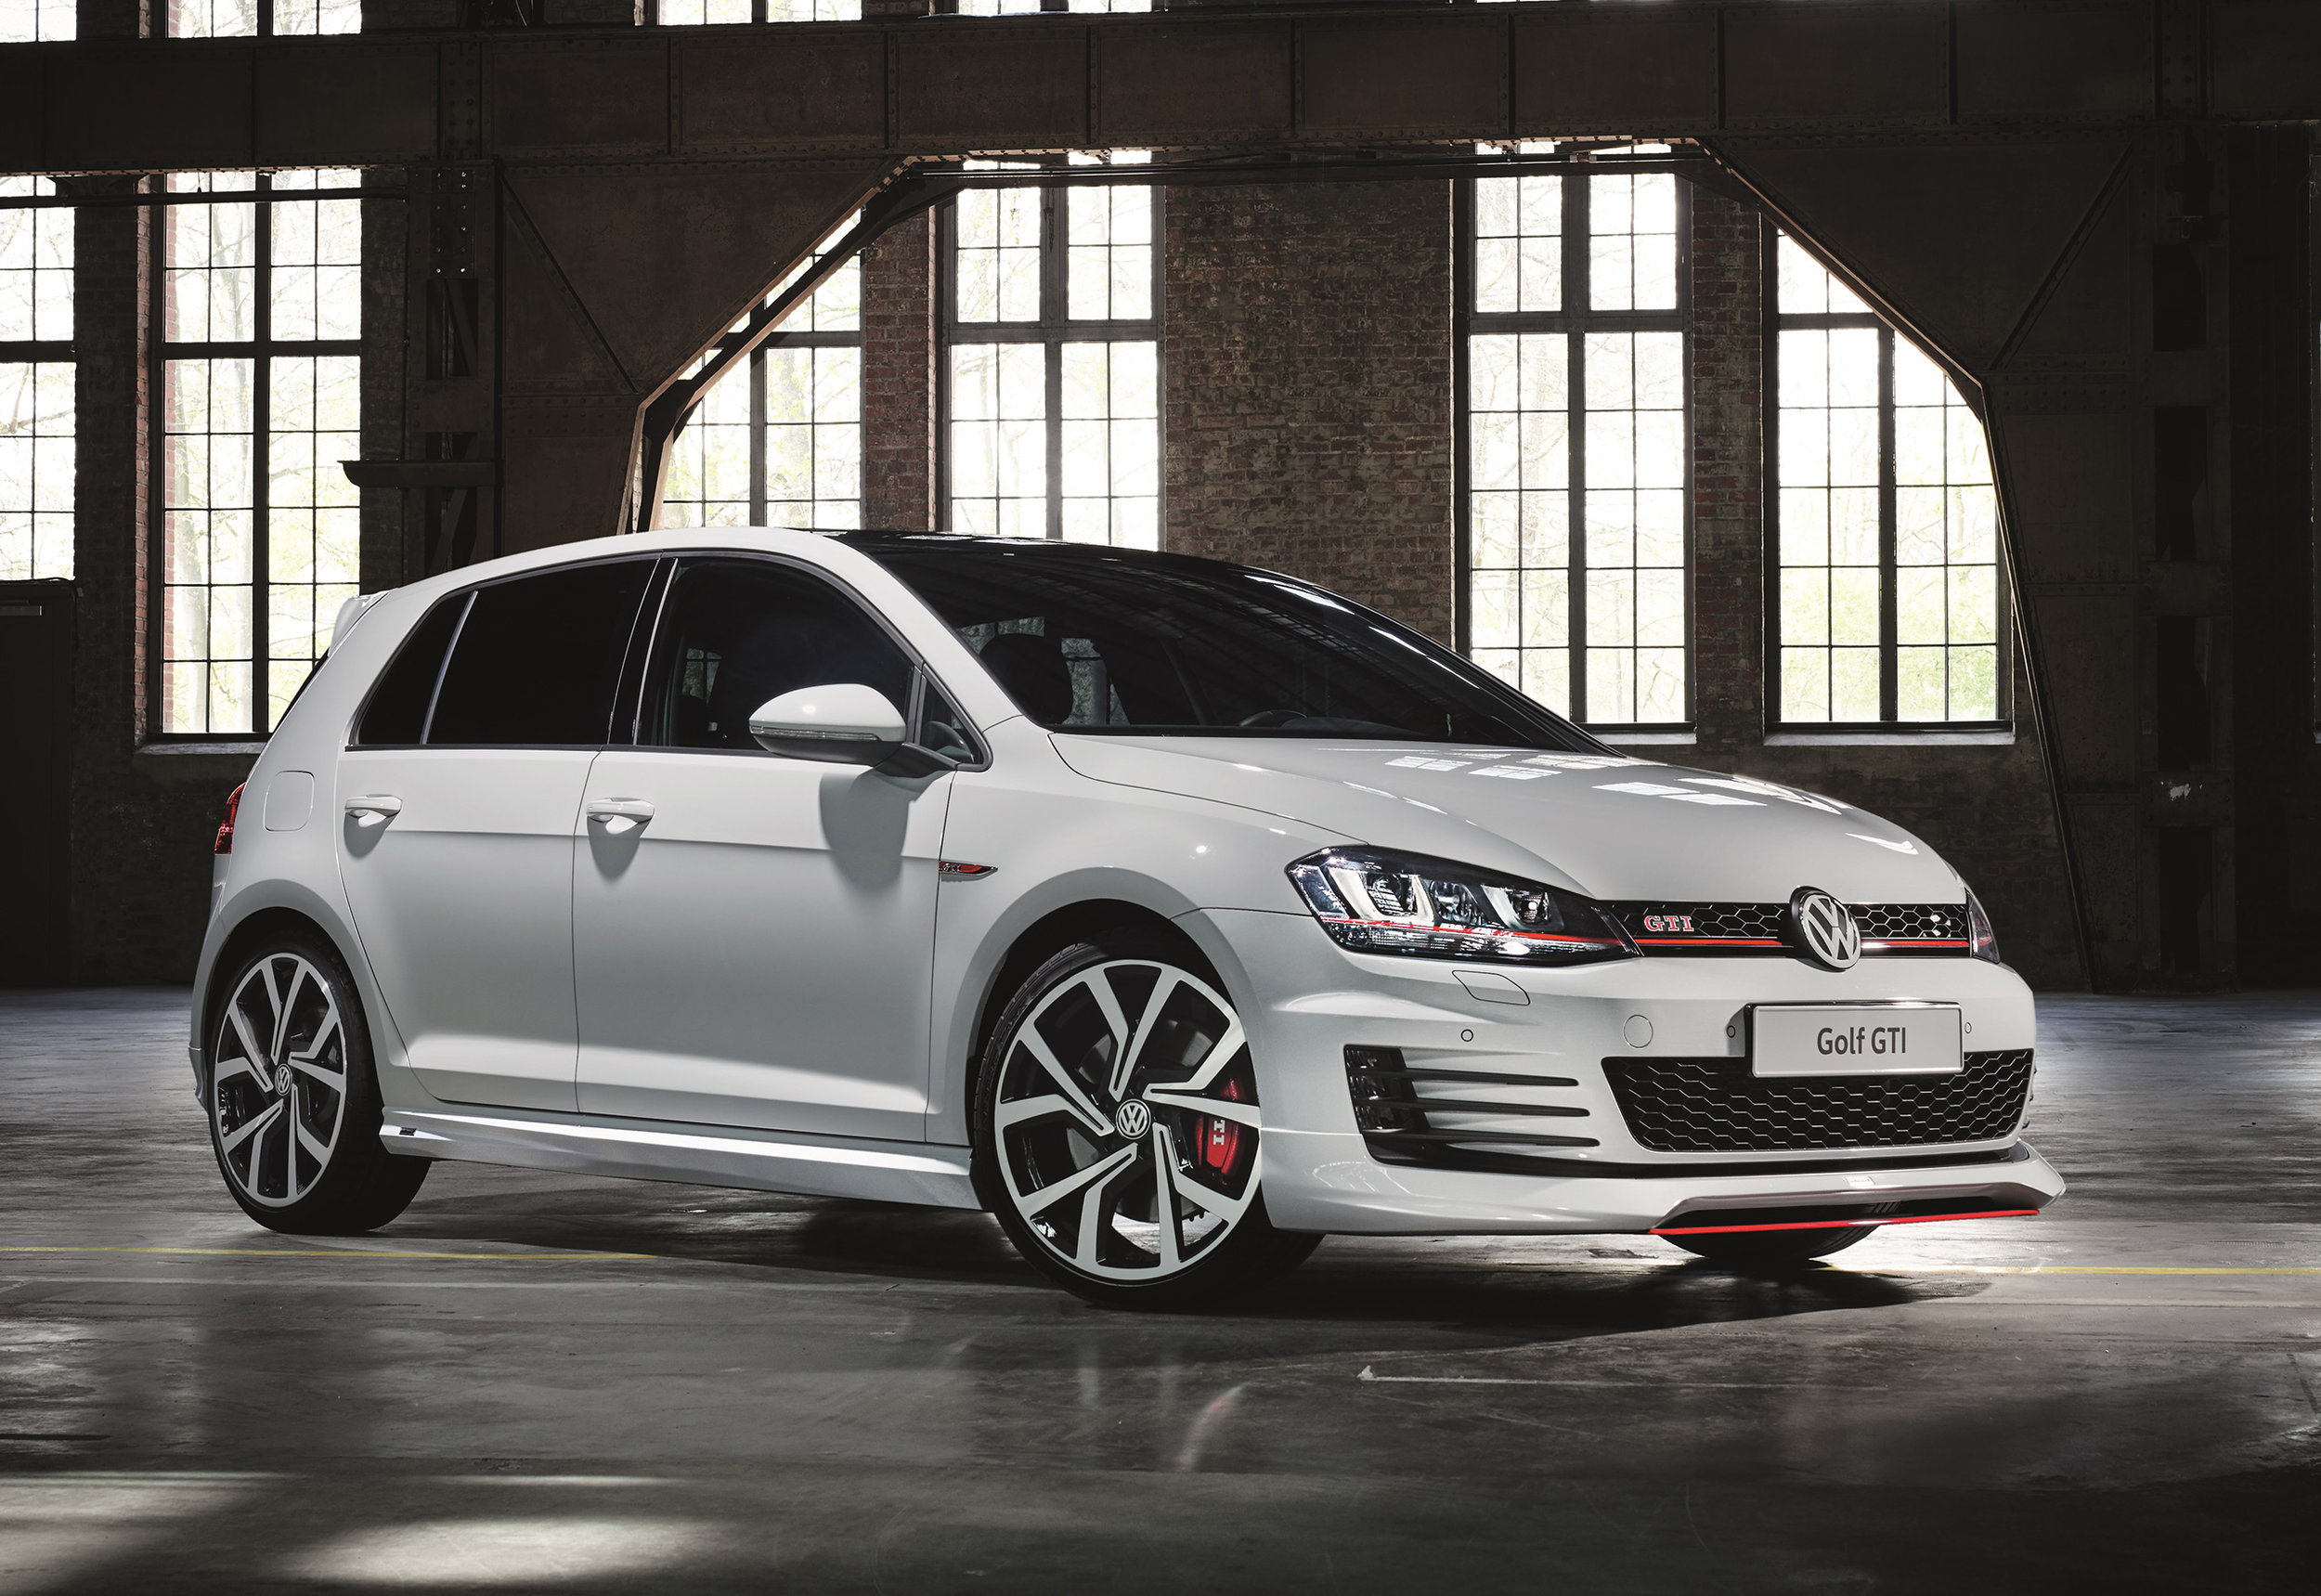 Volkswagen-Performance-Golfs-and-Oettinger-GTI-front.jpg